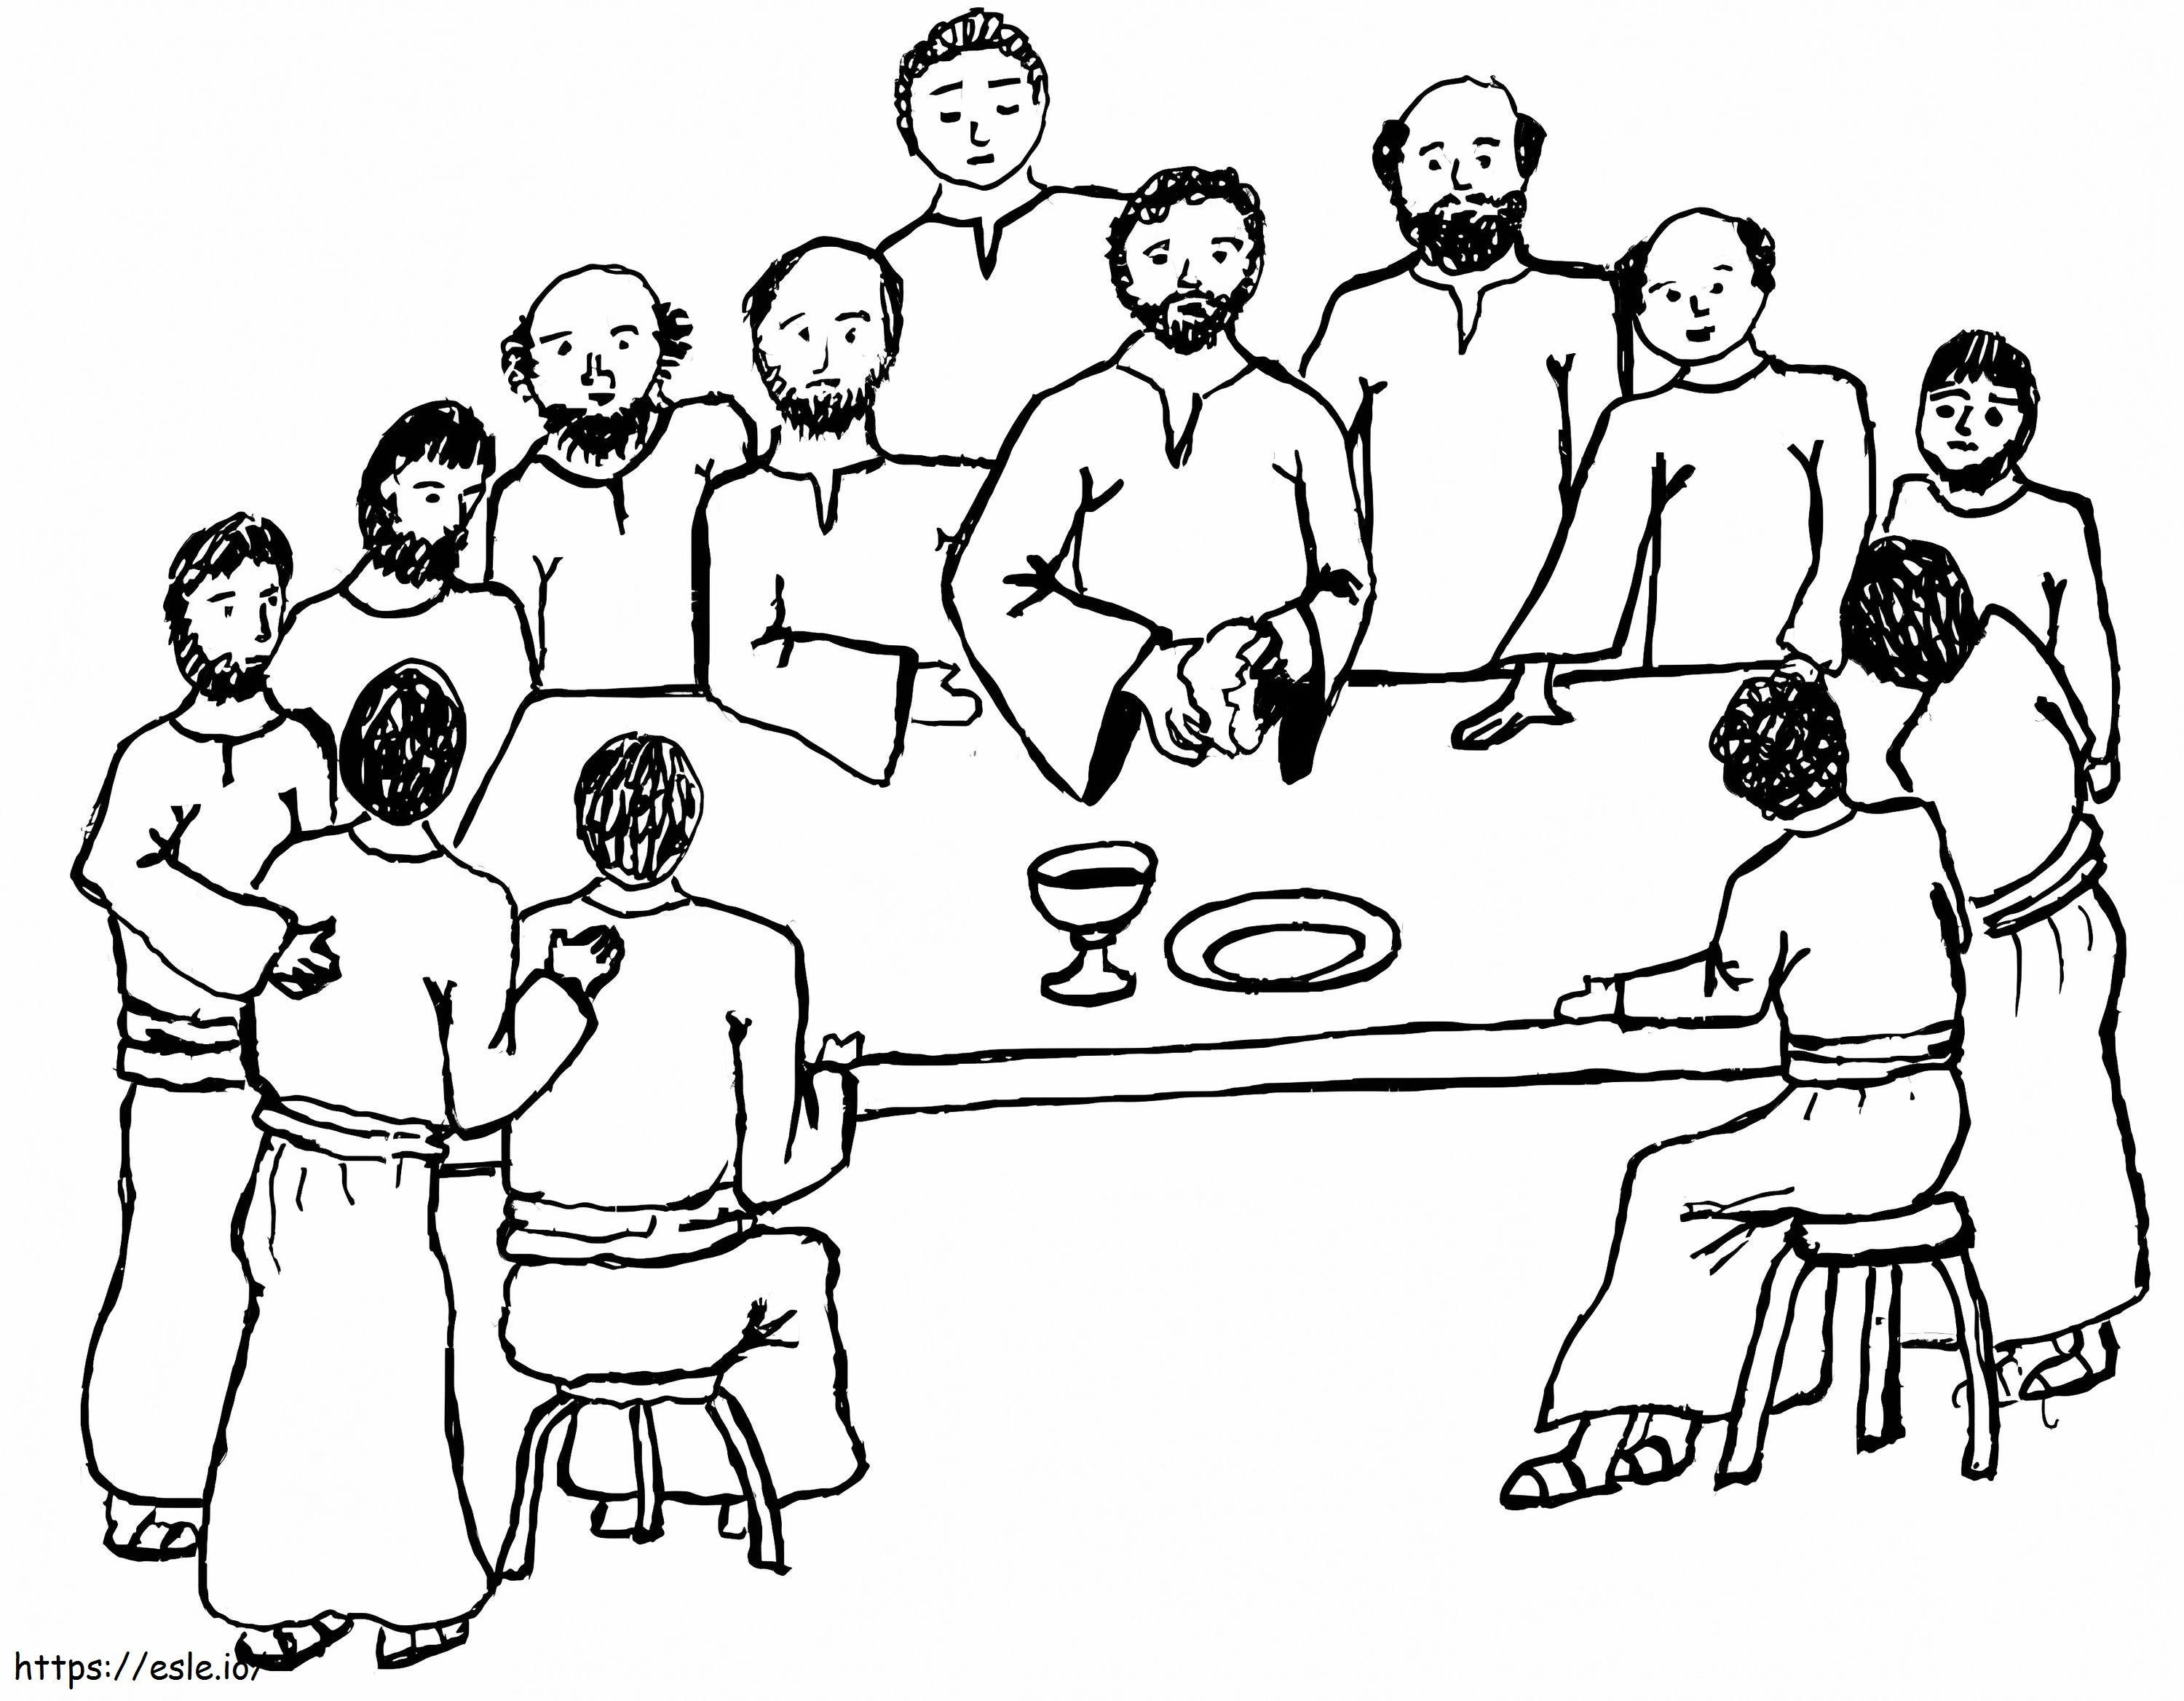 The Last Supper 4 coloring page